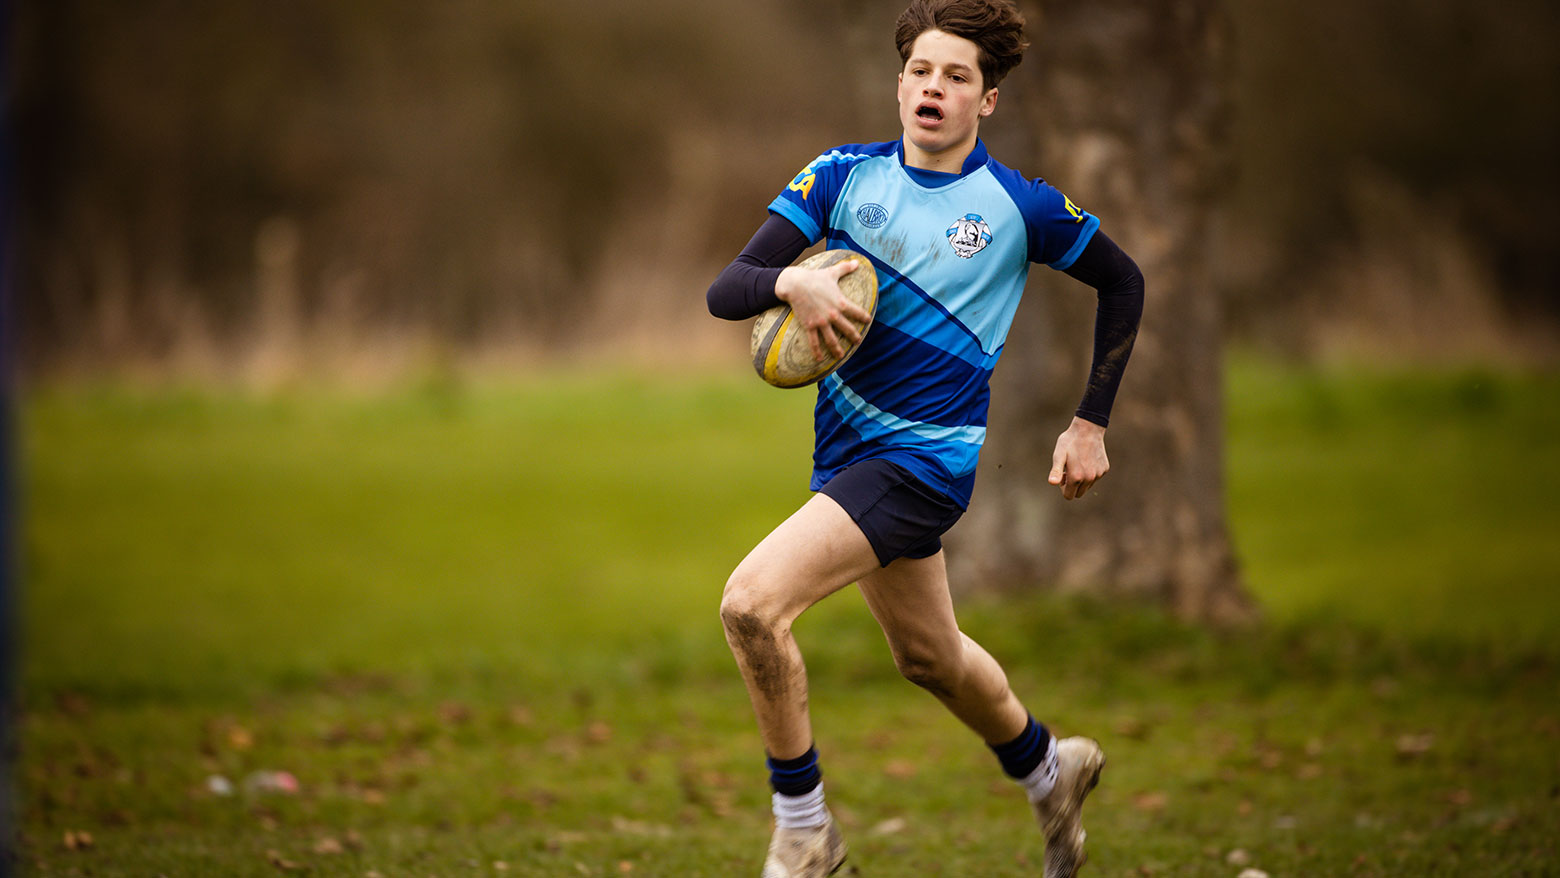 Student running with rugby ball